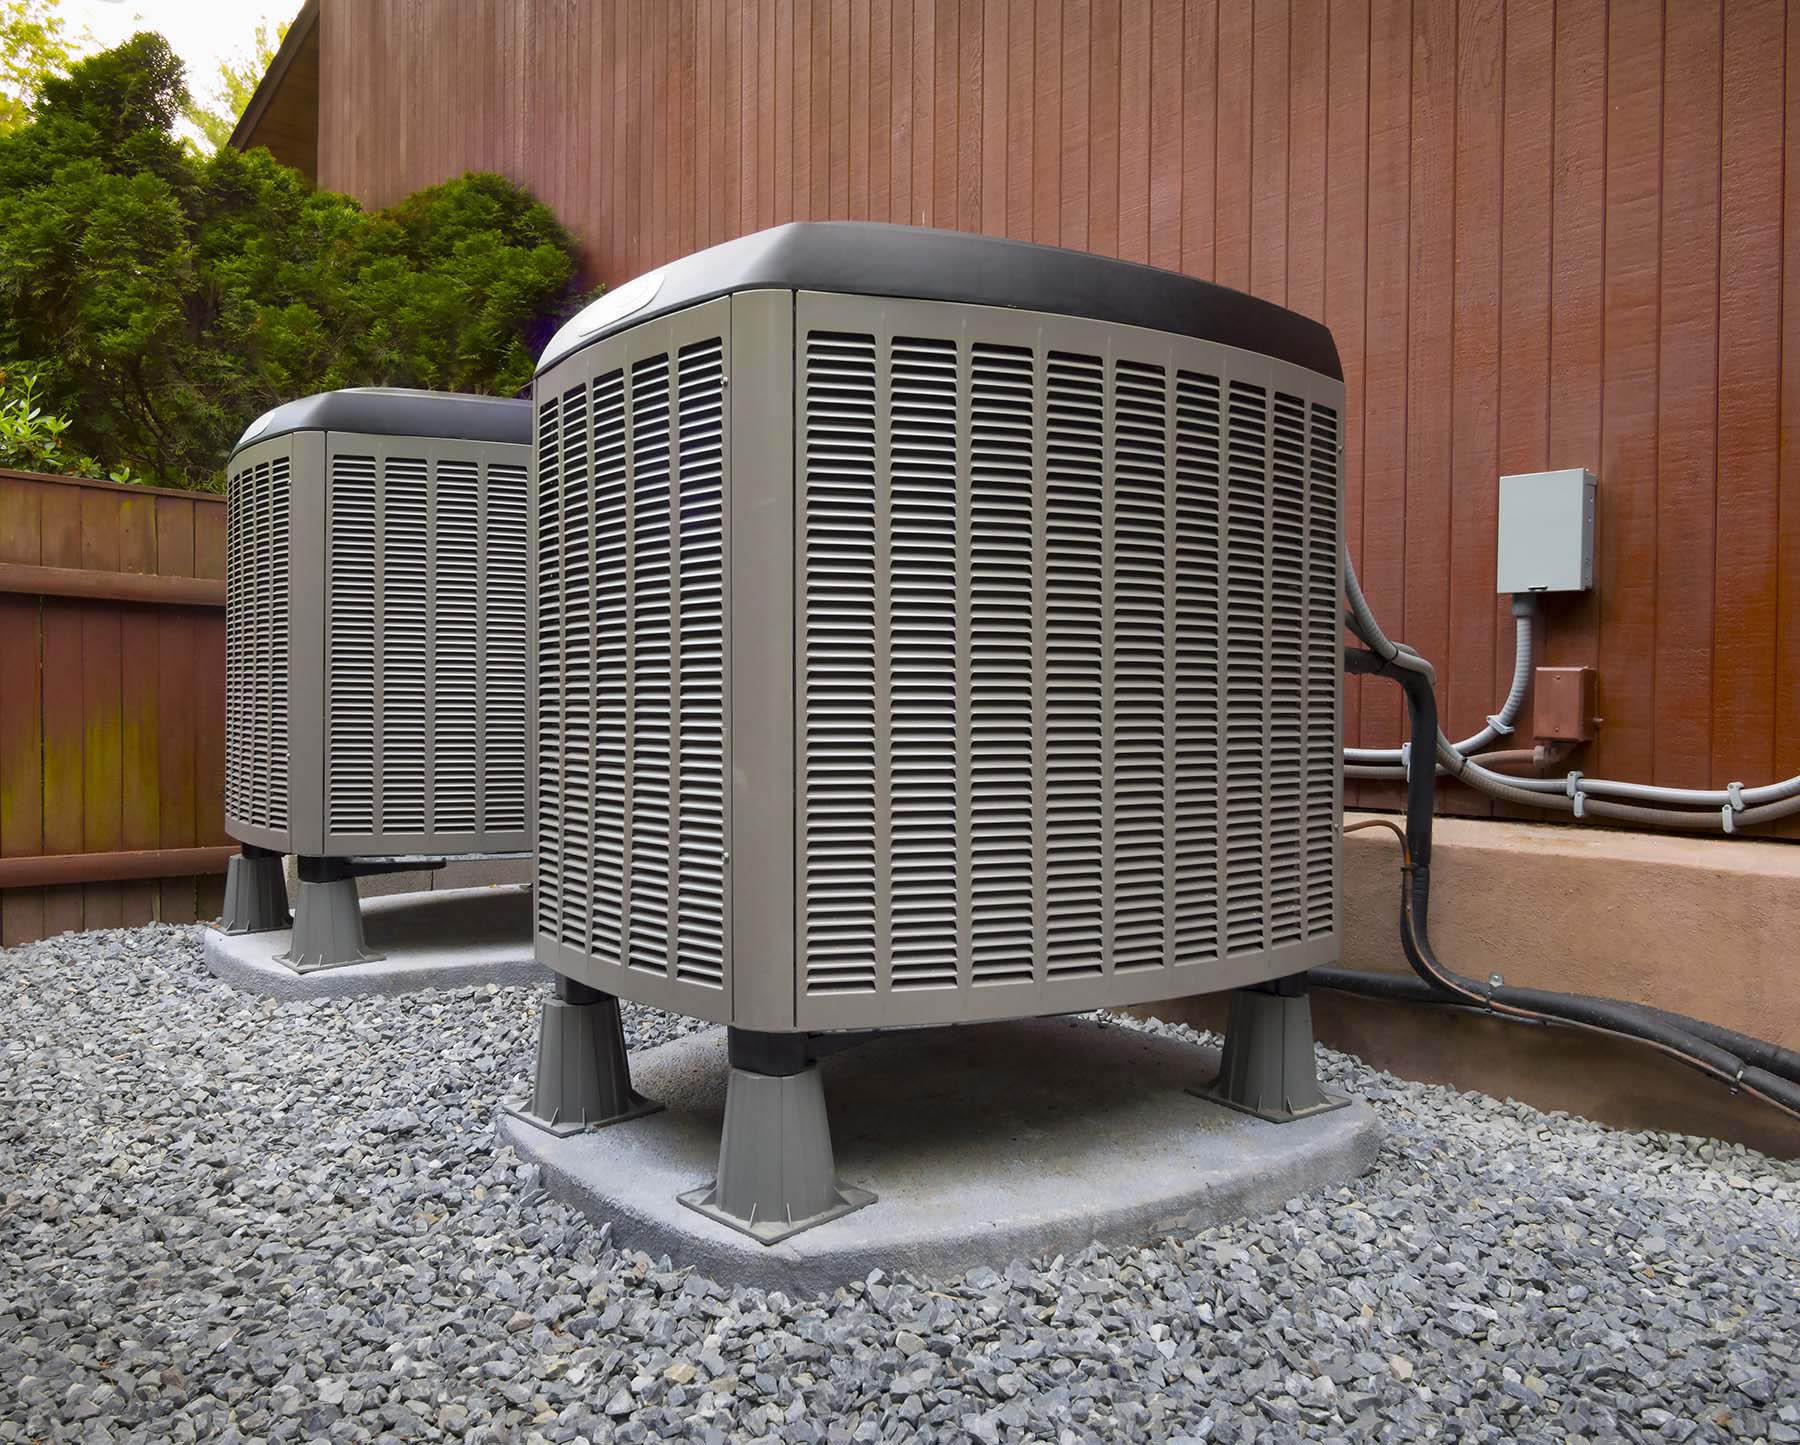 What's the Right Type of AC for Your Home?